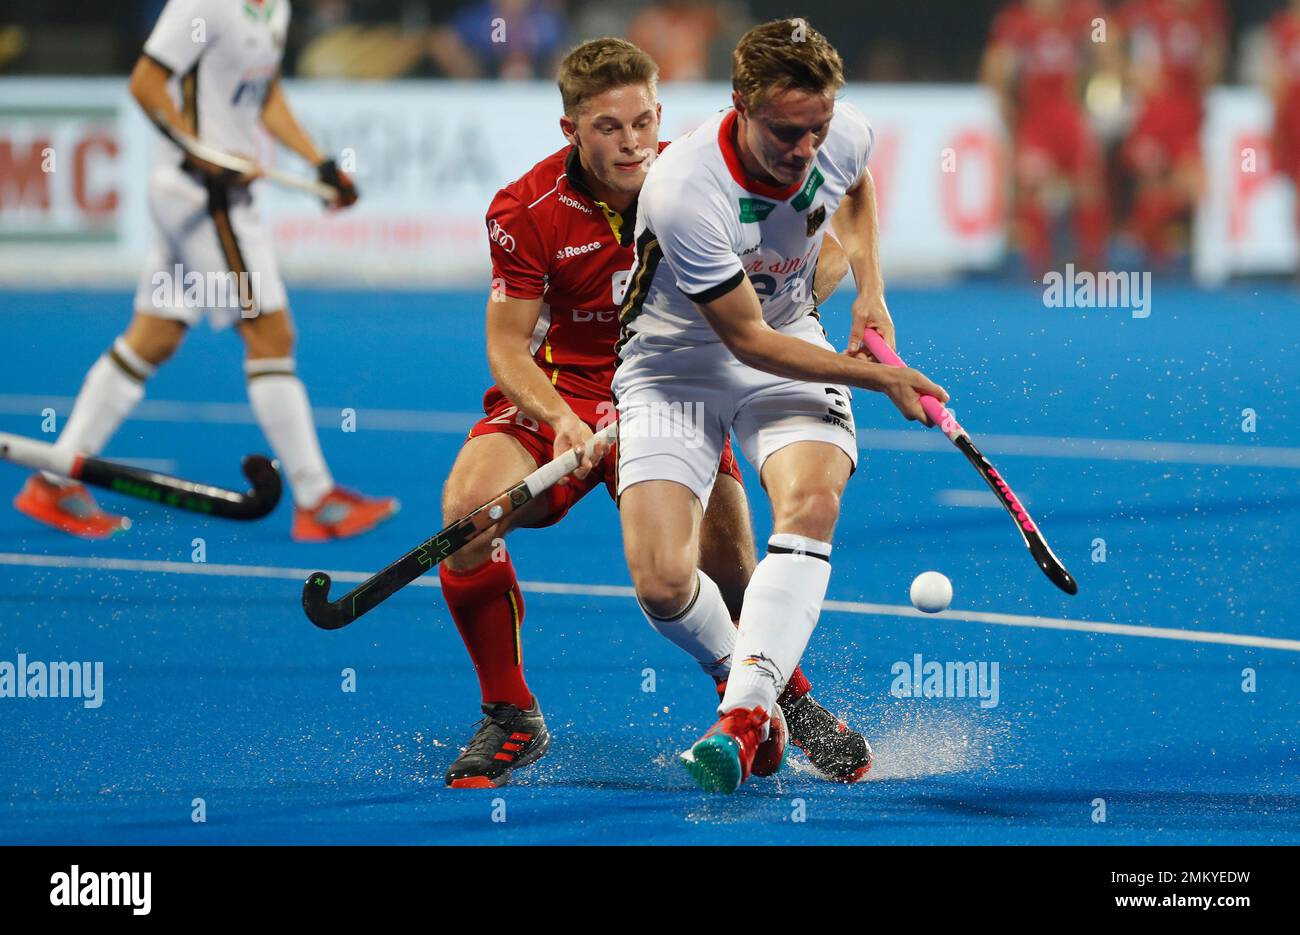 Germany's Mats Grambusch, right, competes for the ball with Belgium's  Victor Wegnez during the Men's Hockey World Cup quarterfinal match between  Belgium and Germany at the Kalinga Stadium in Bhubaneswar, India, Thursday,